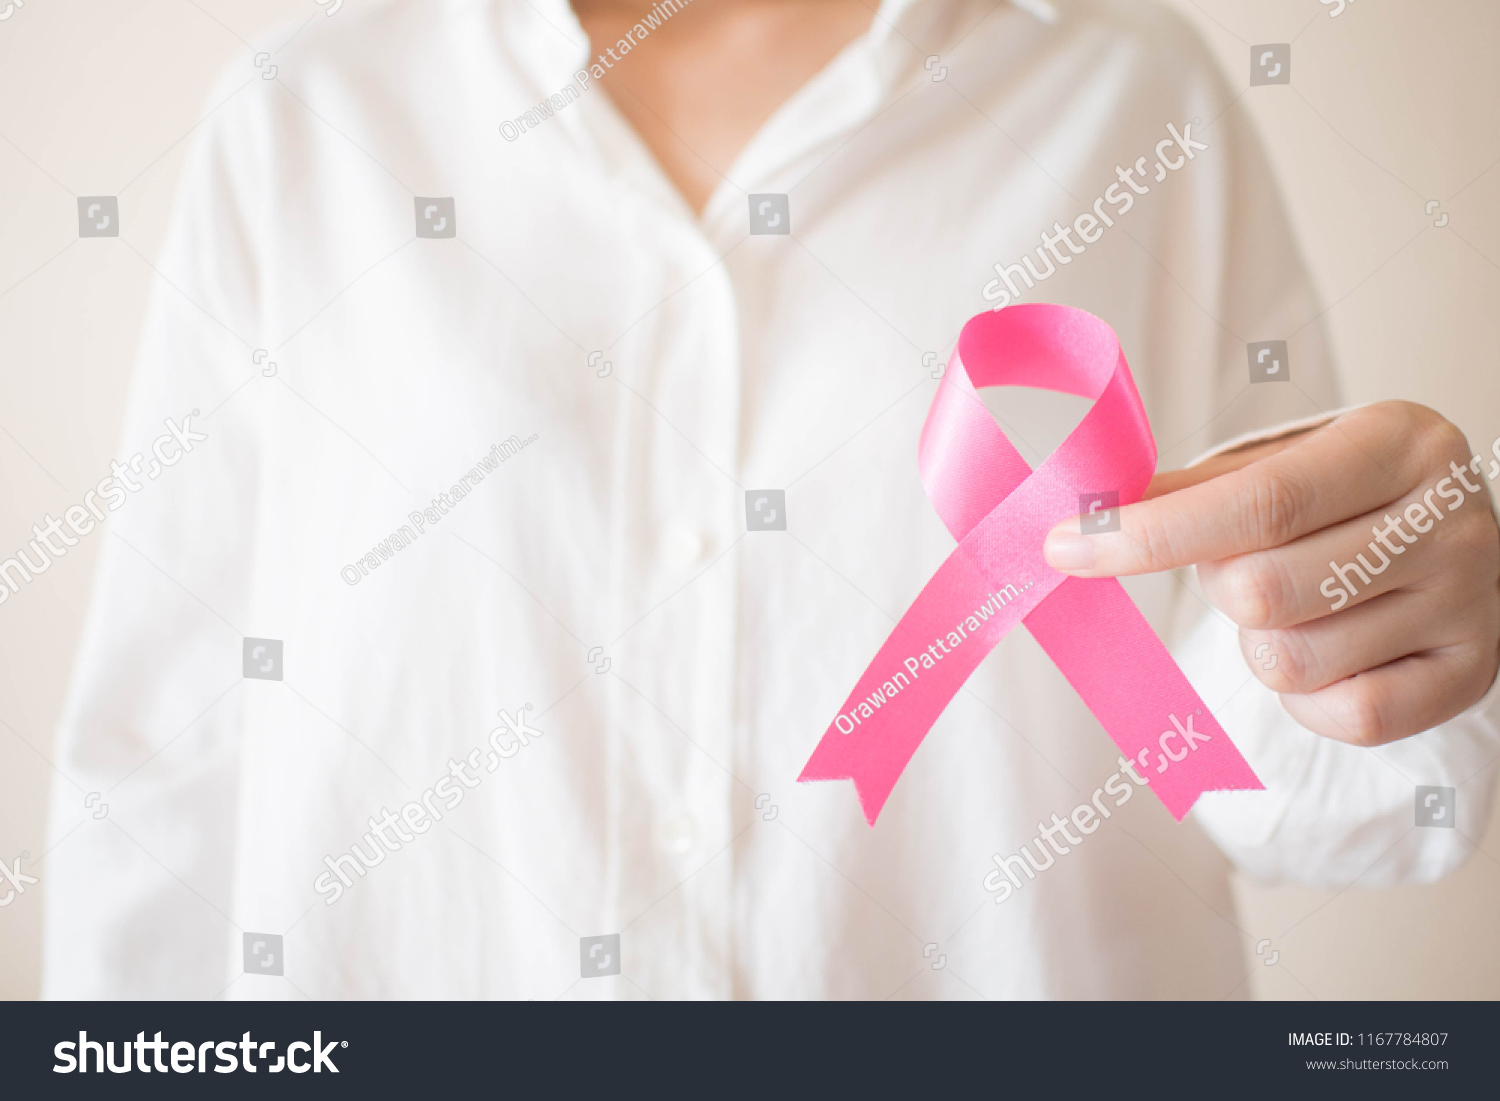 Breast Cancer Awareness Month in October. Close up of female hands holding pink ribbon awareness for support people who live w/ breast cancer. Women's health care and medical concept. Copy space. #1167784807